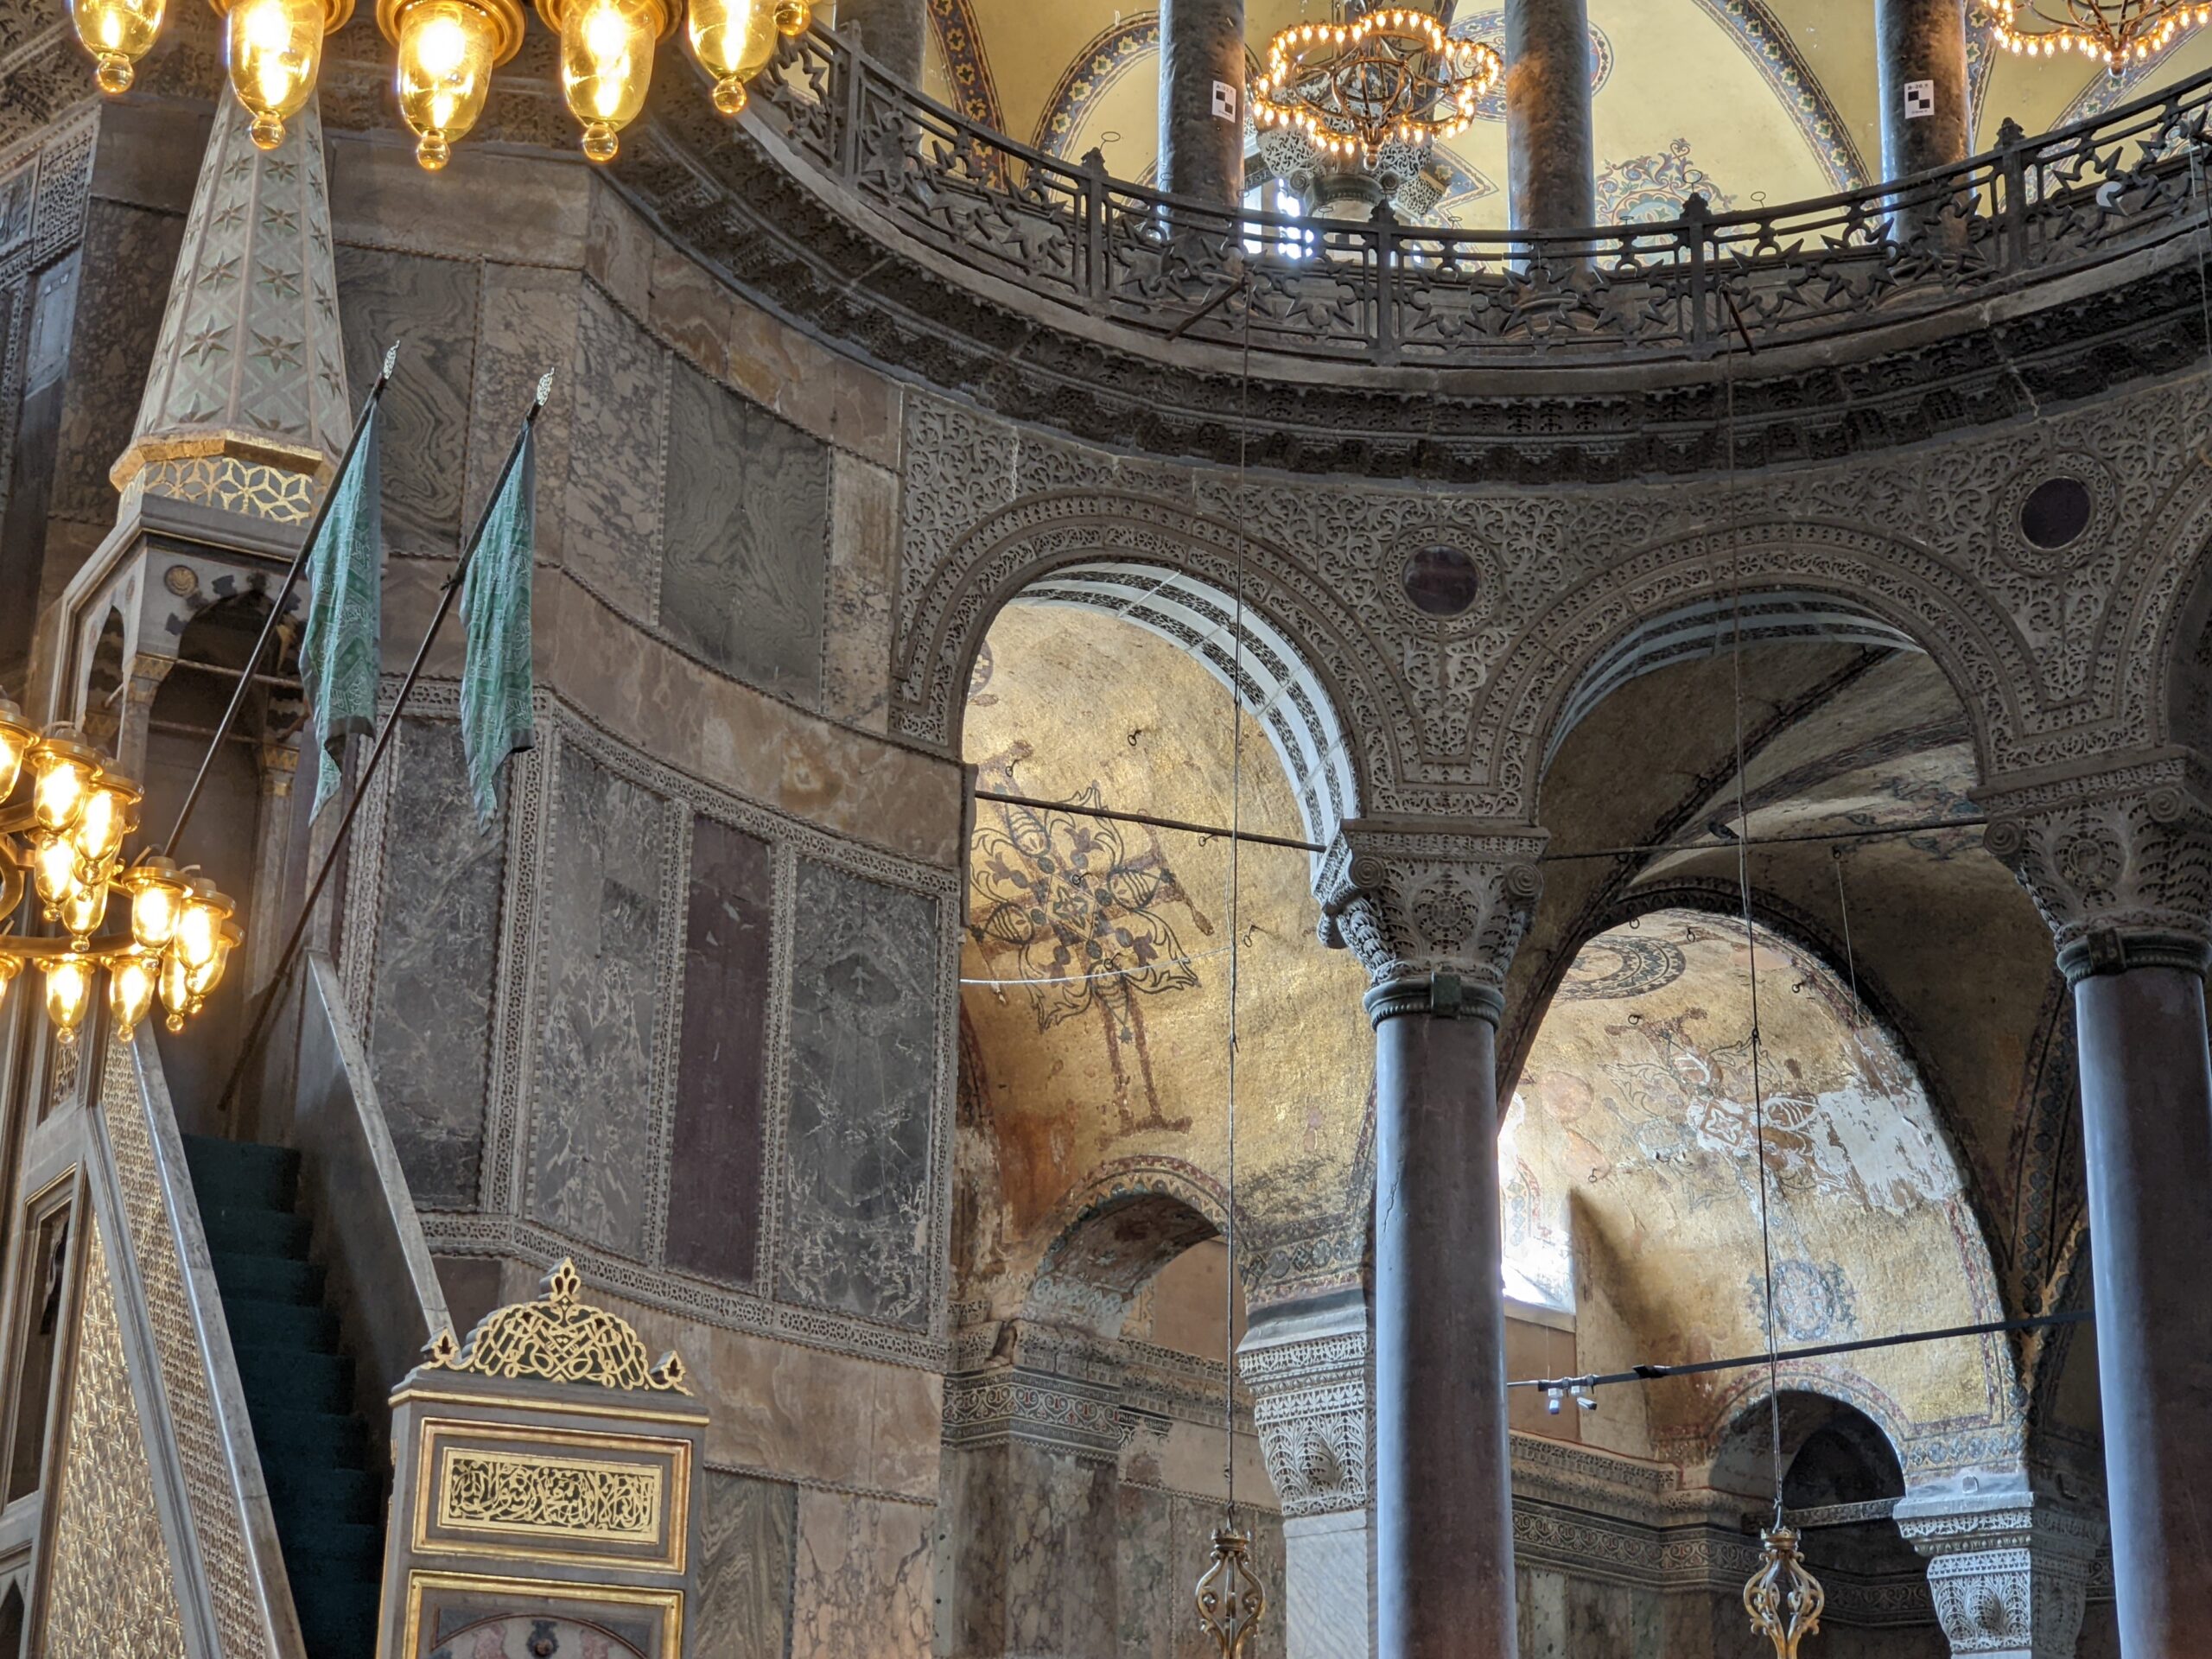 Istanbul Day Two- Hagia Sophia and More